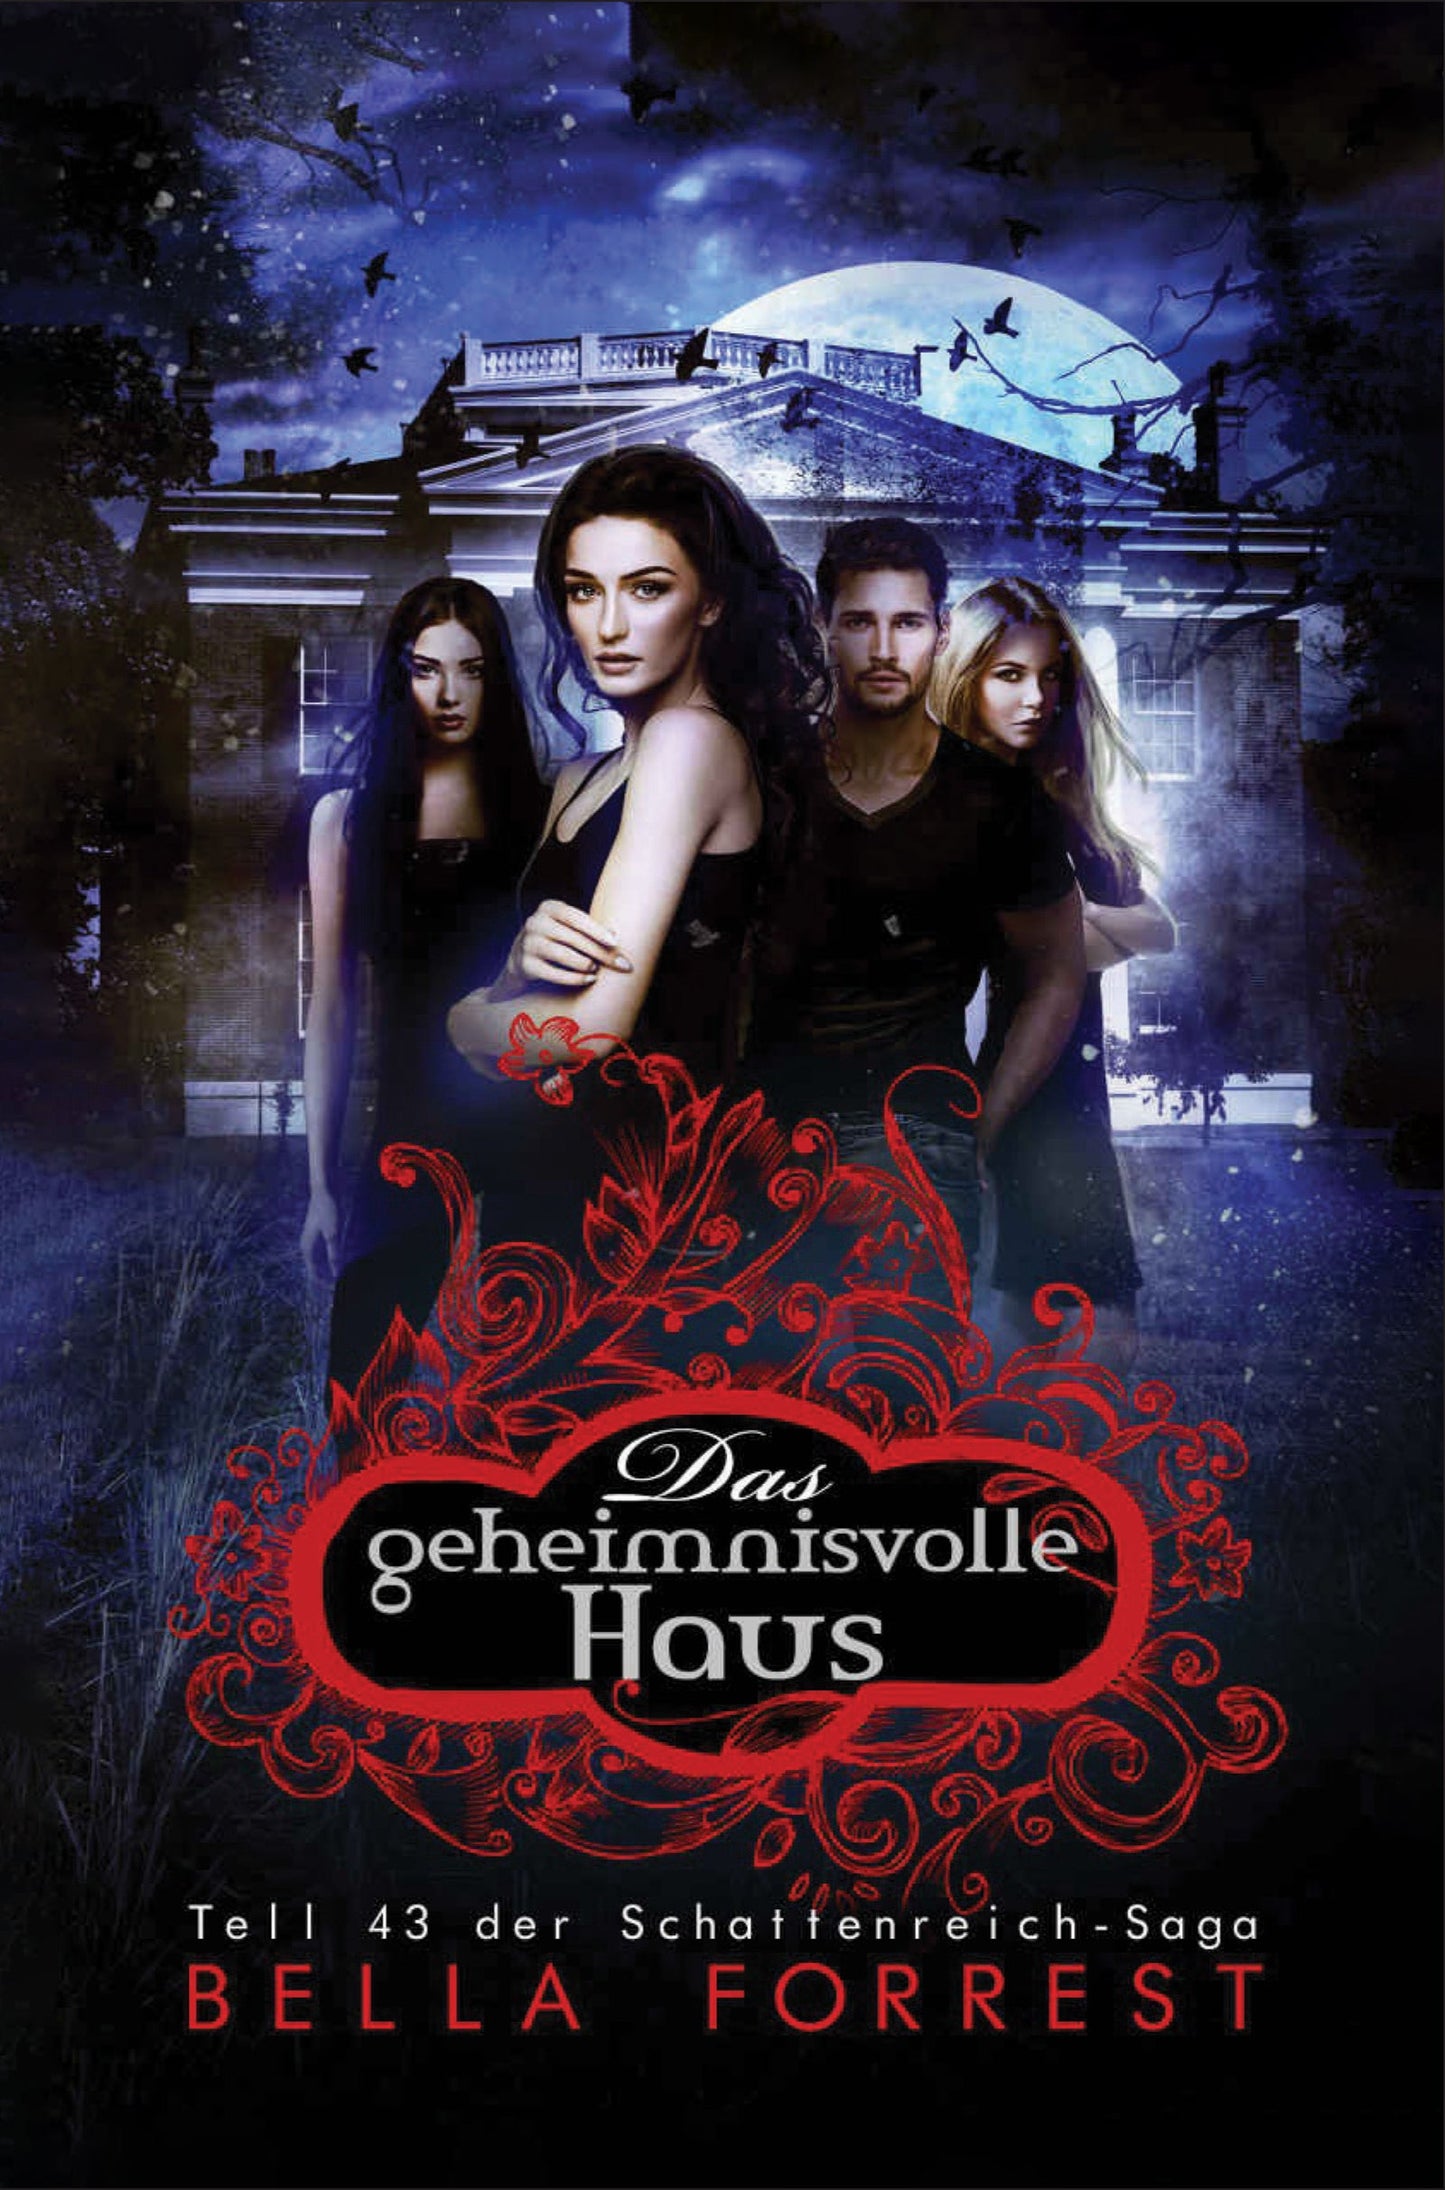 A Shade of Vampire 43: A House of Mysteries